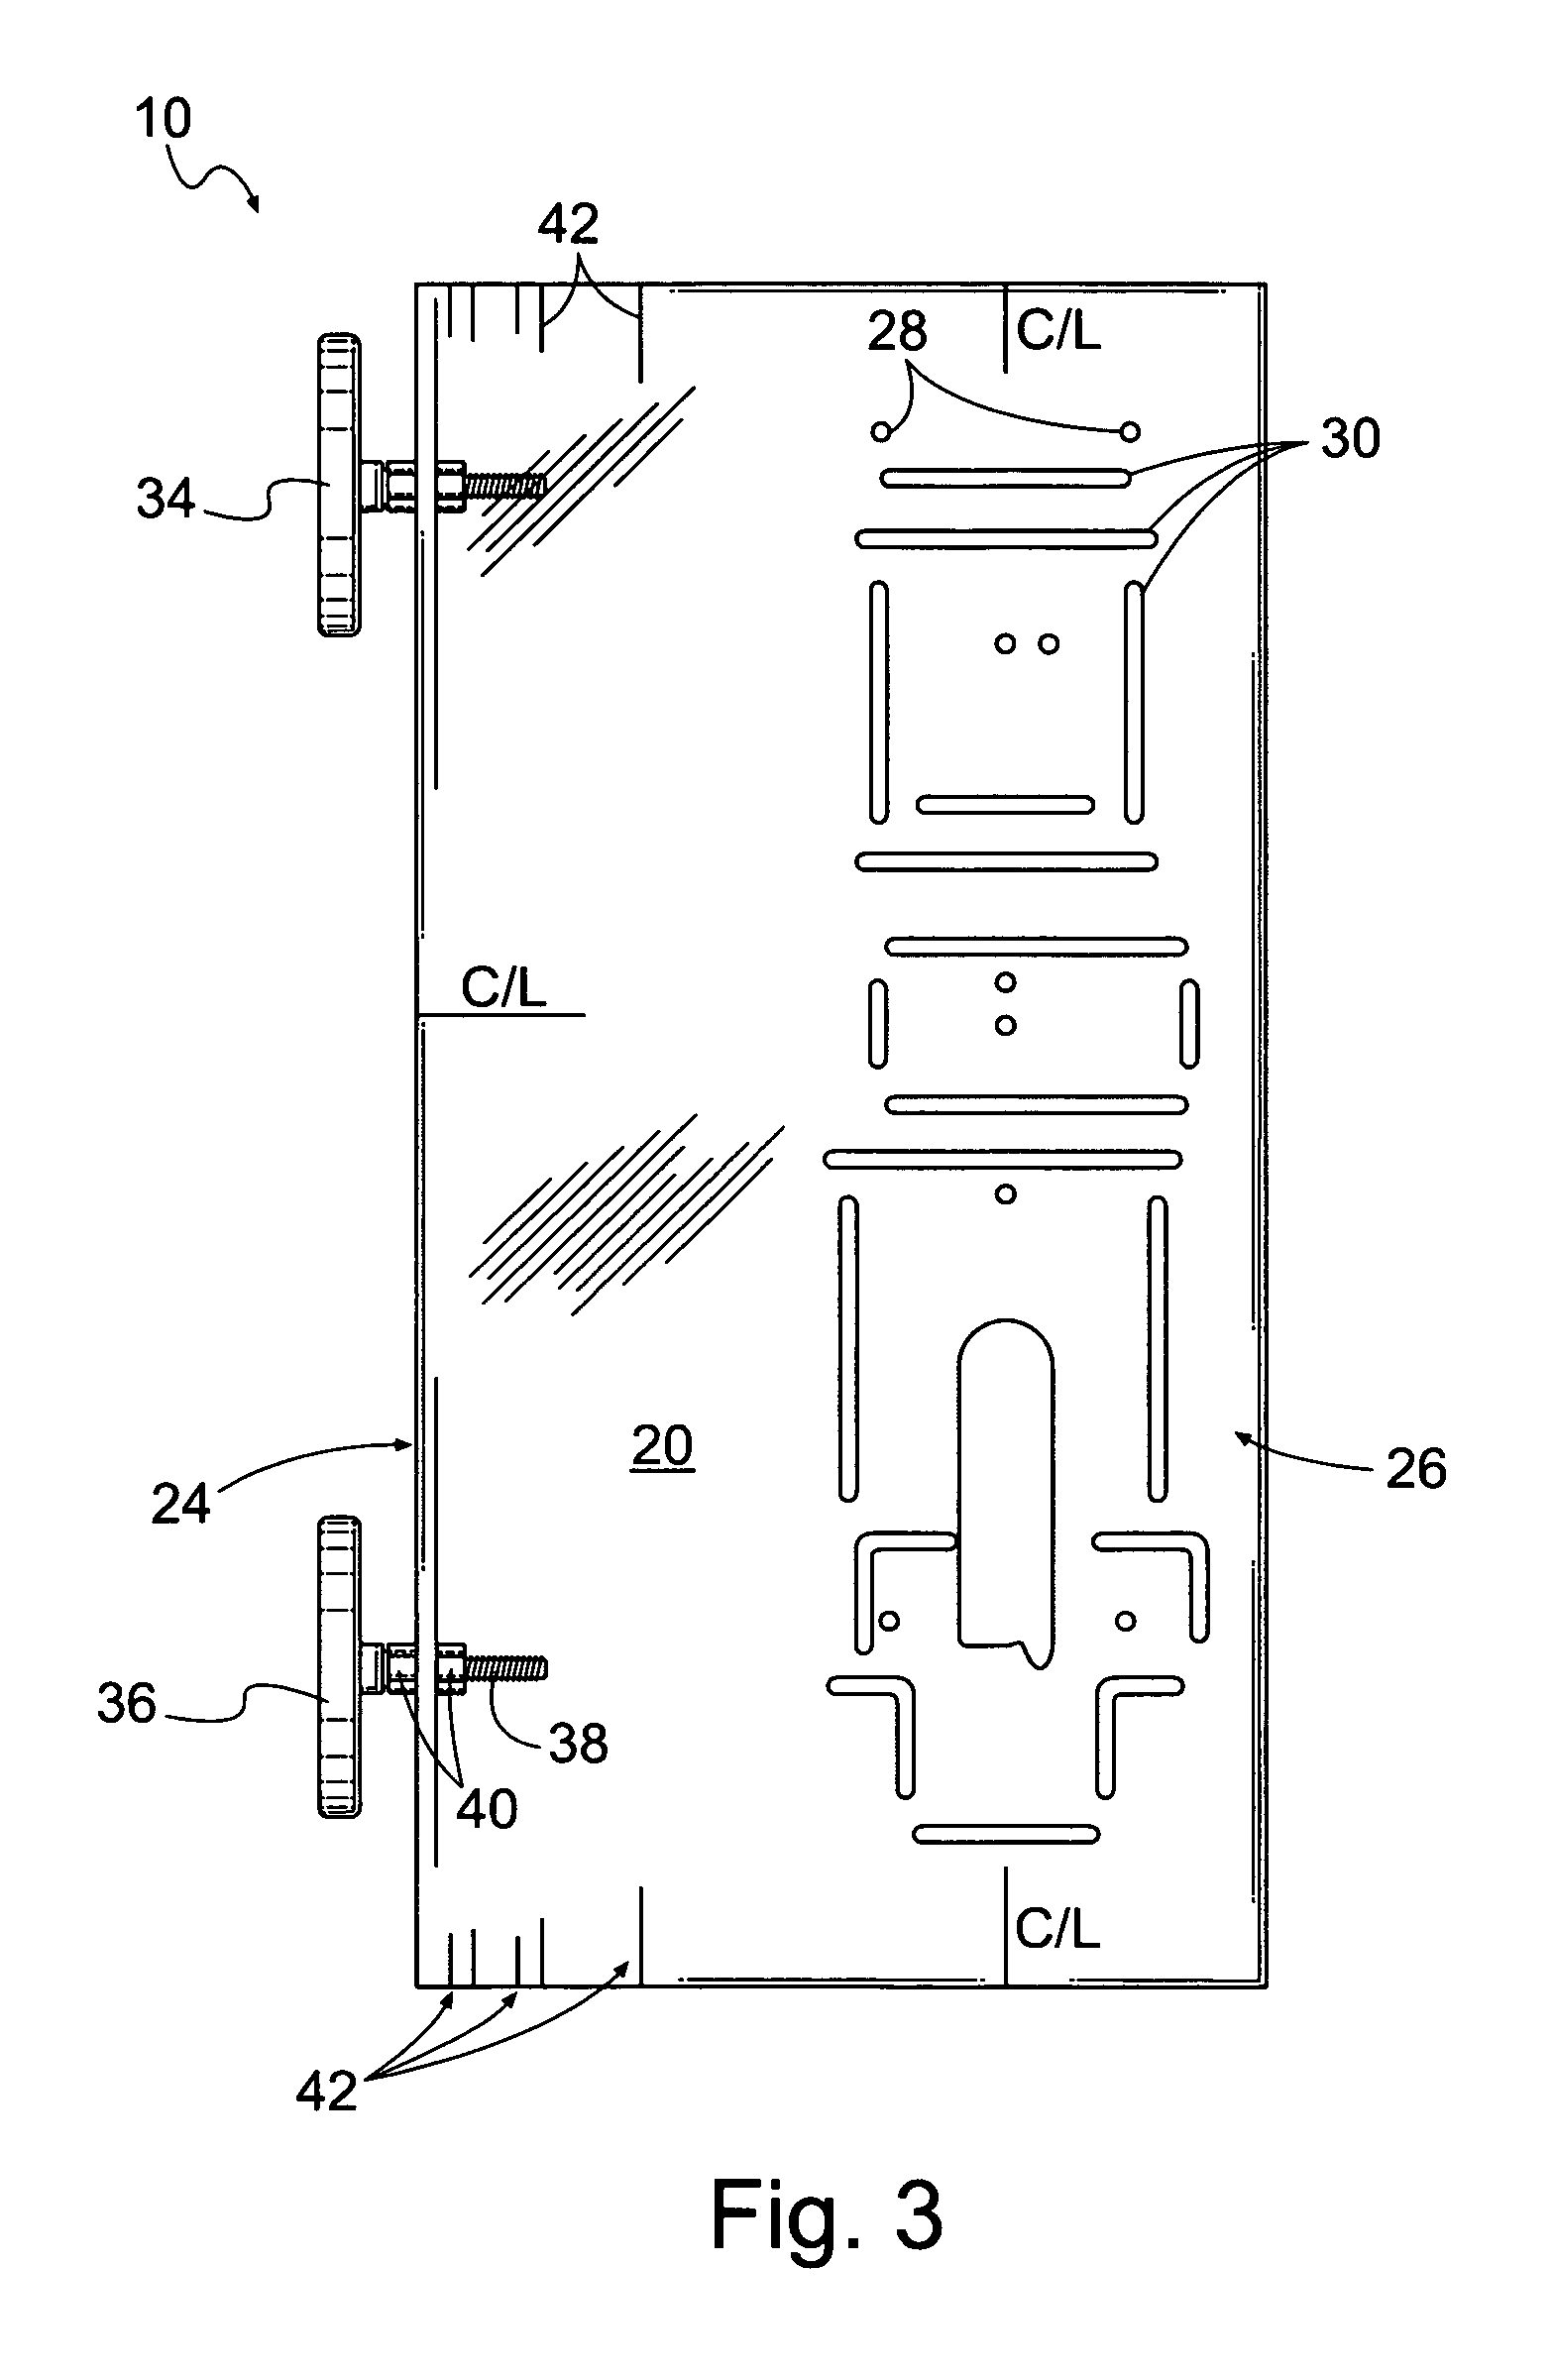 Template for fitting exit hardware on a door